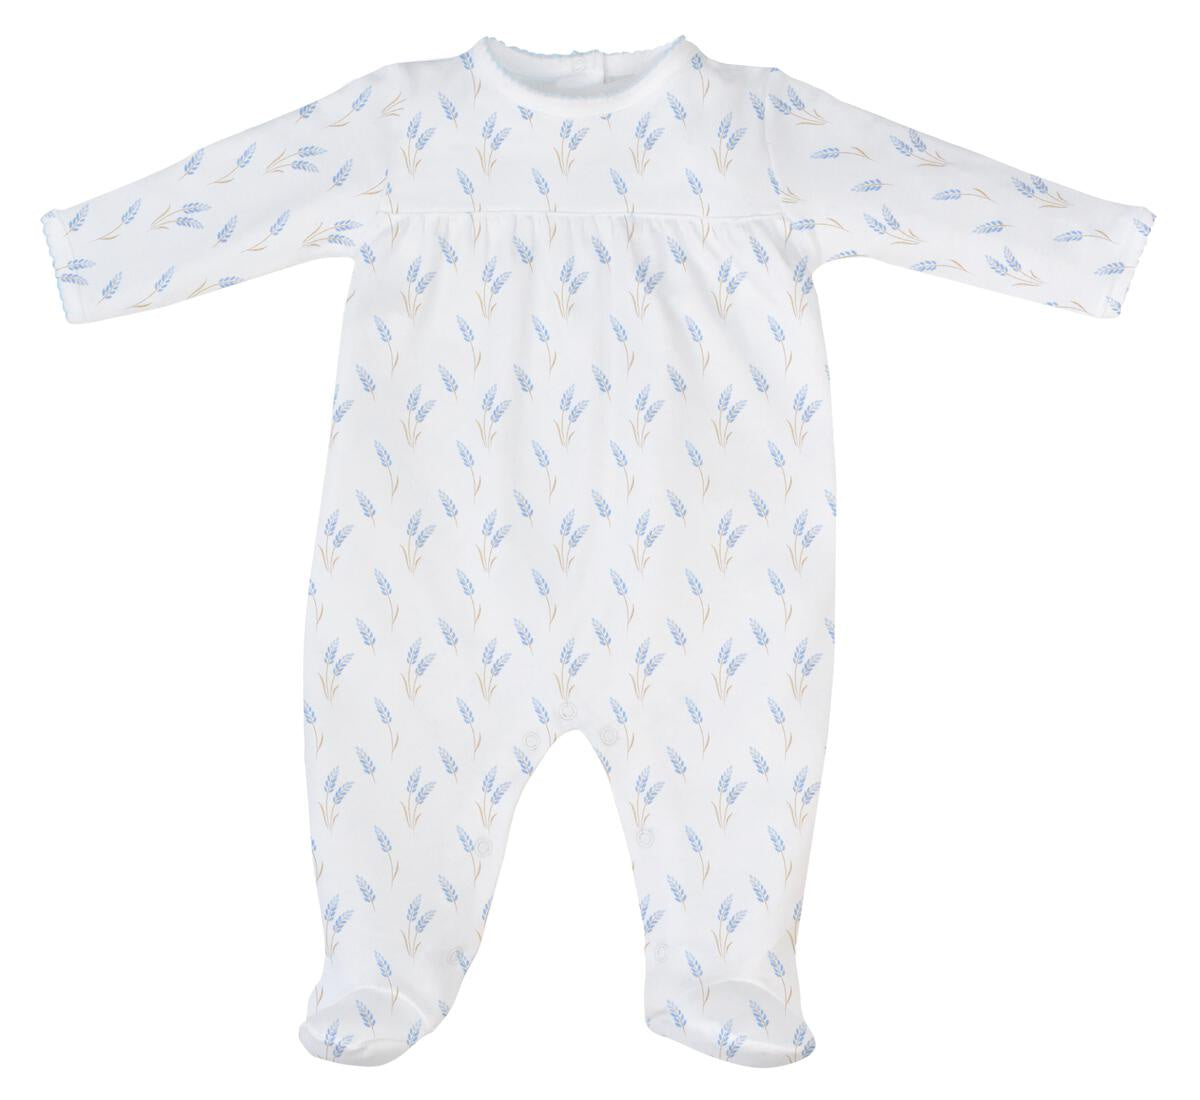 Lyda Baby White Footie Wheat Spikes Footie PP121-7101B 5007